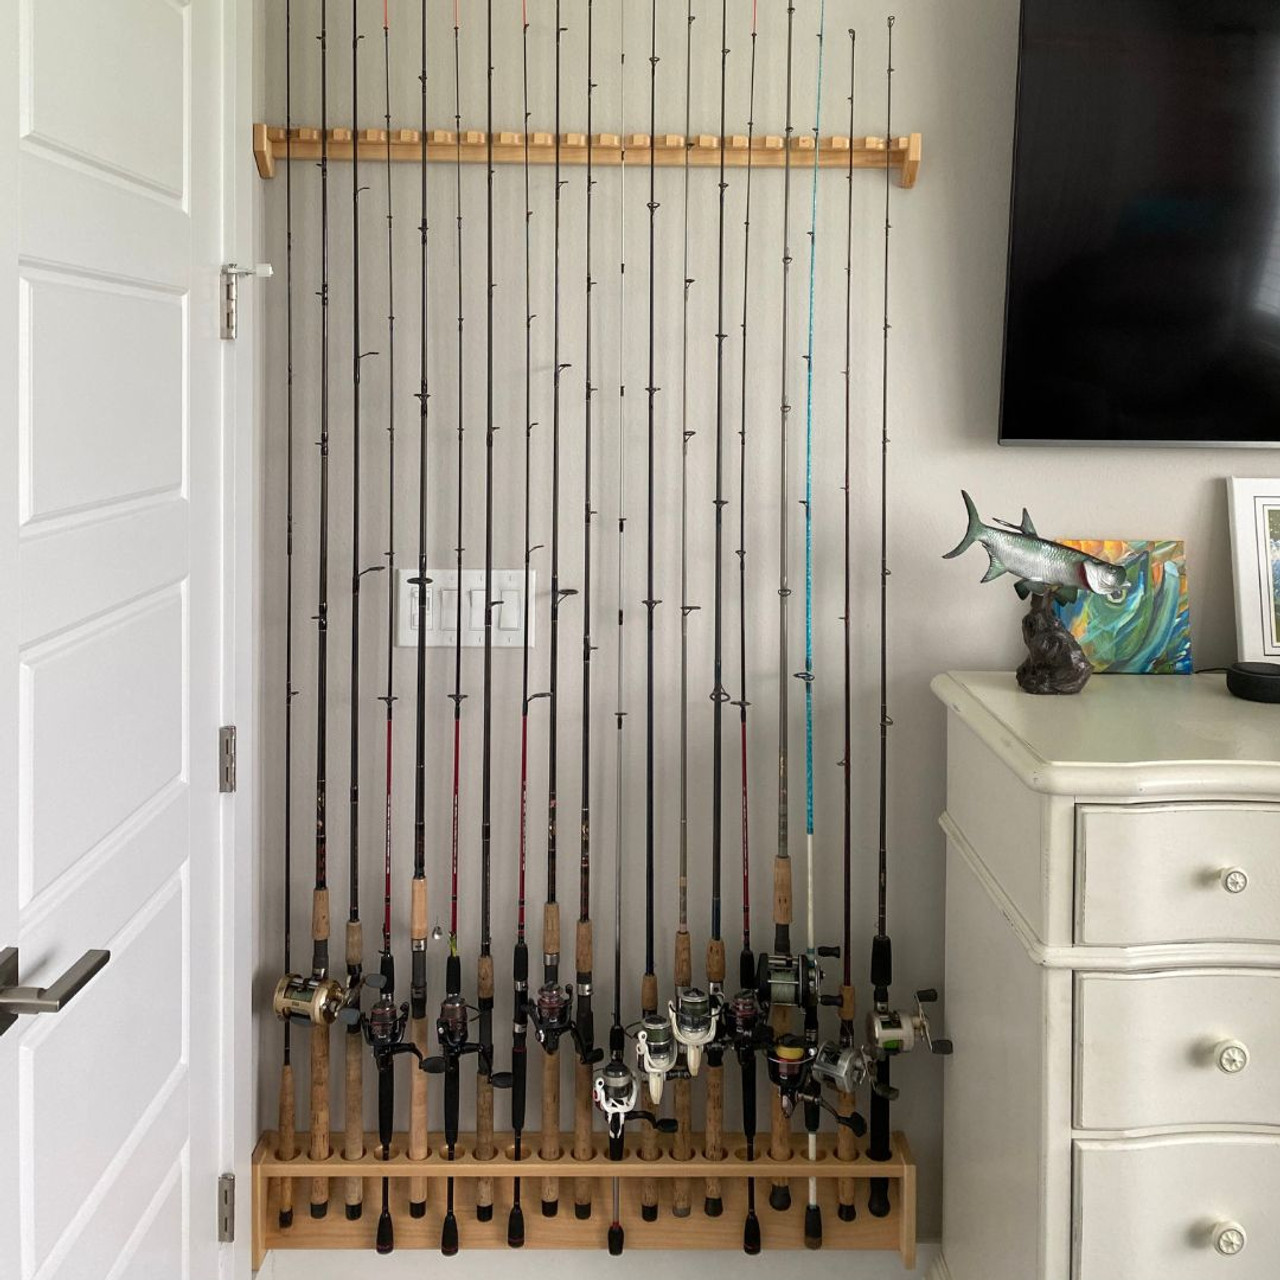 How to make fishing rod rack CNC woodworking  Fishing rod rack, Diy  fishing rod, Fishing room